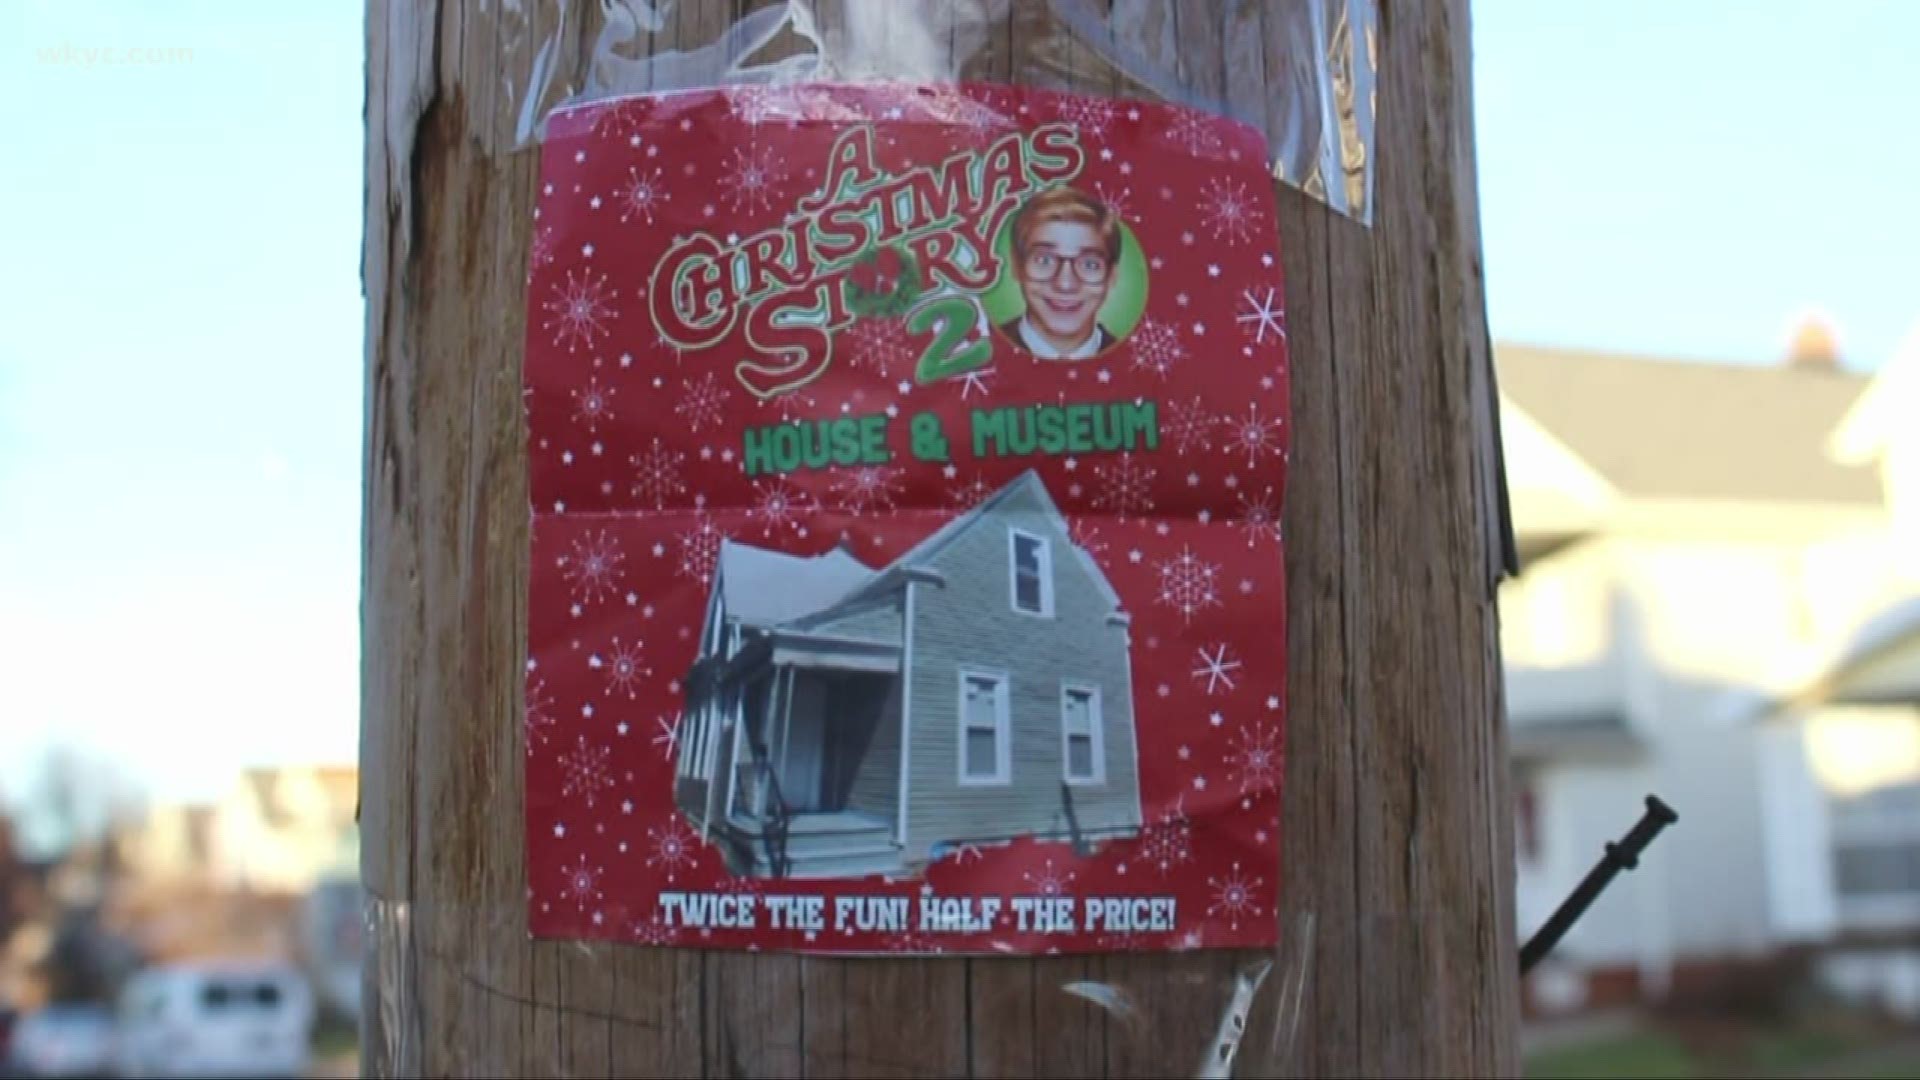 Twice the fun, half the price. Have you visited the 'A Christmas story 2' House?